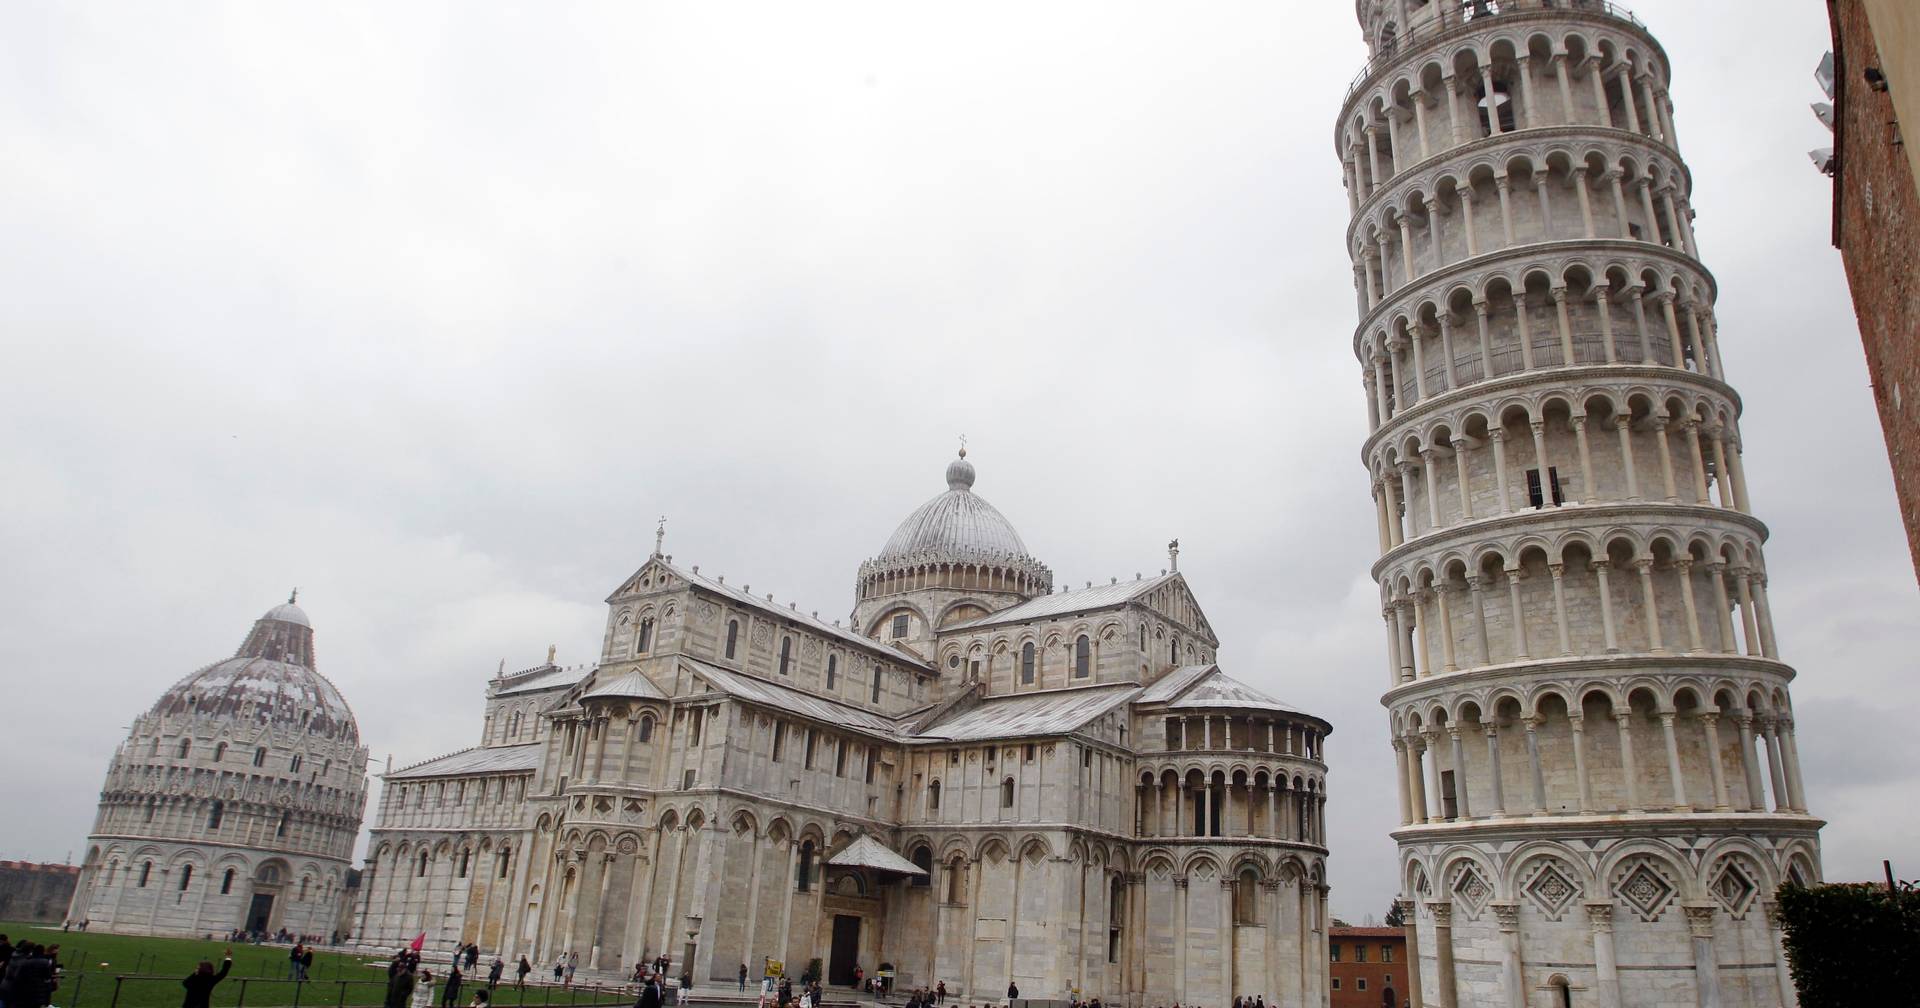 The Tower of Pisa is in “exceptional health” at 850 years old